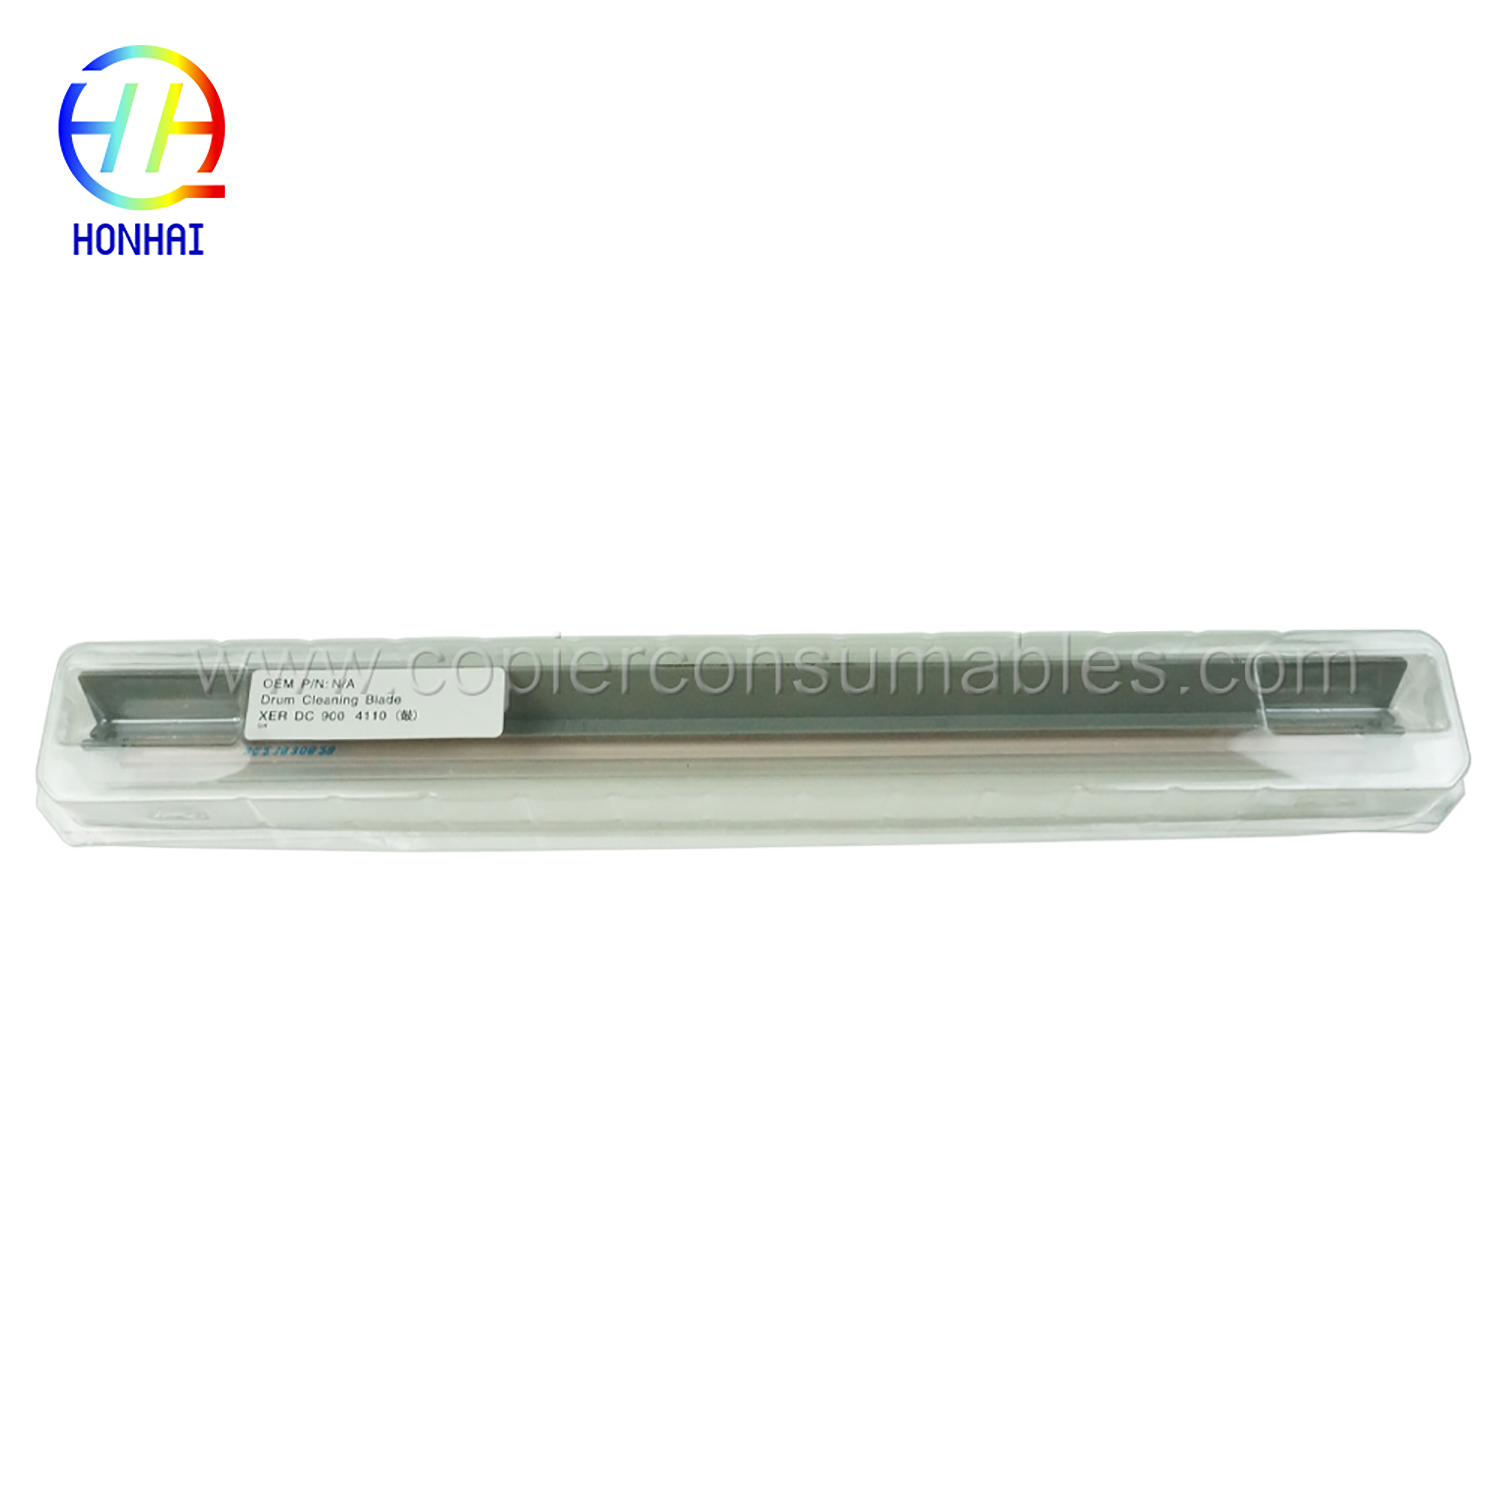 Drum Cleaning blade for Xerox DC 900 4110 (1) 拷贝